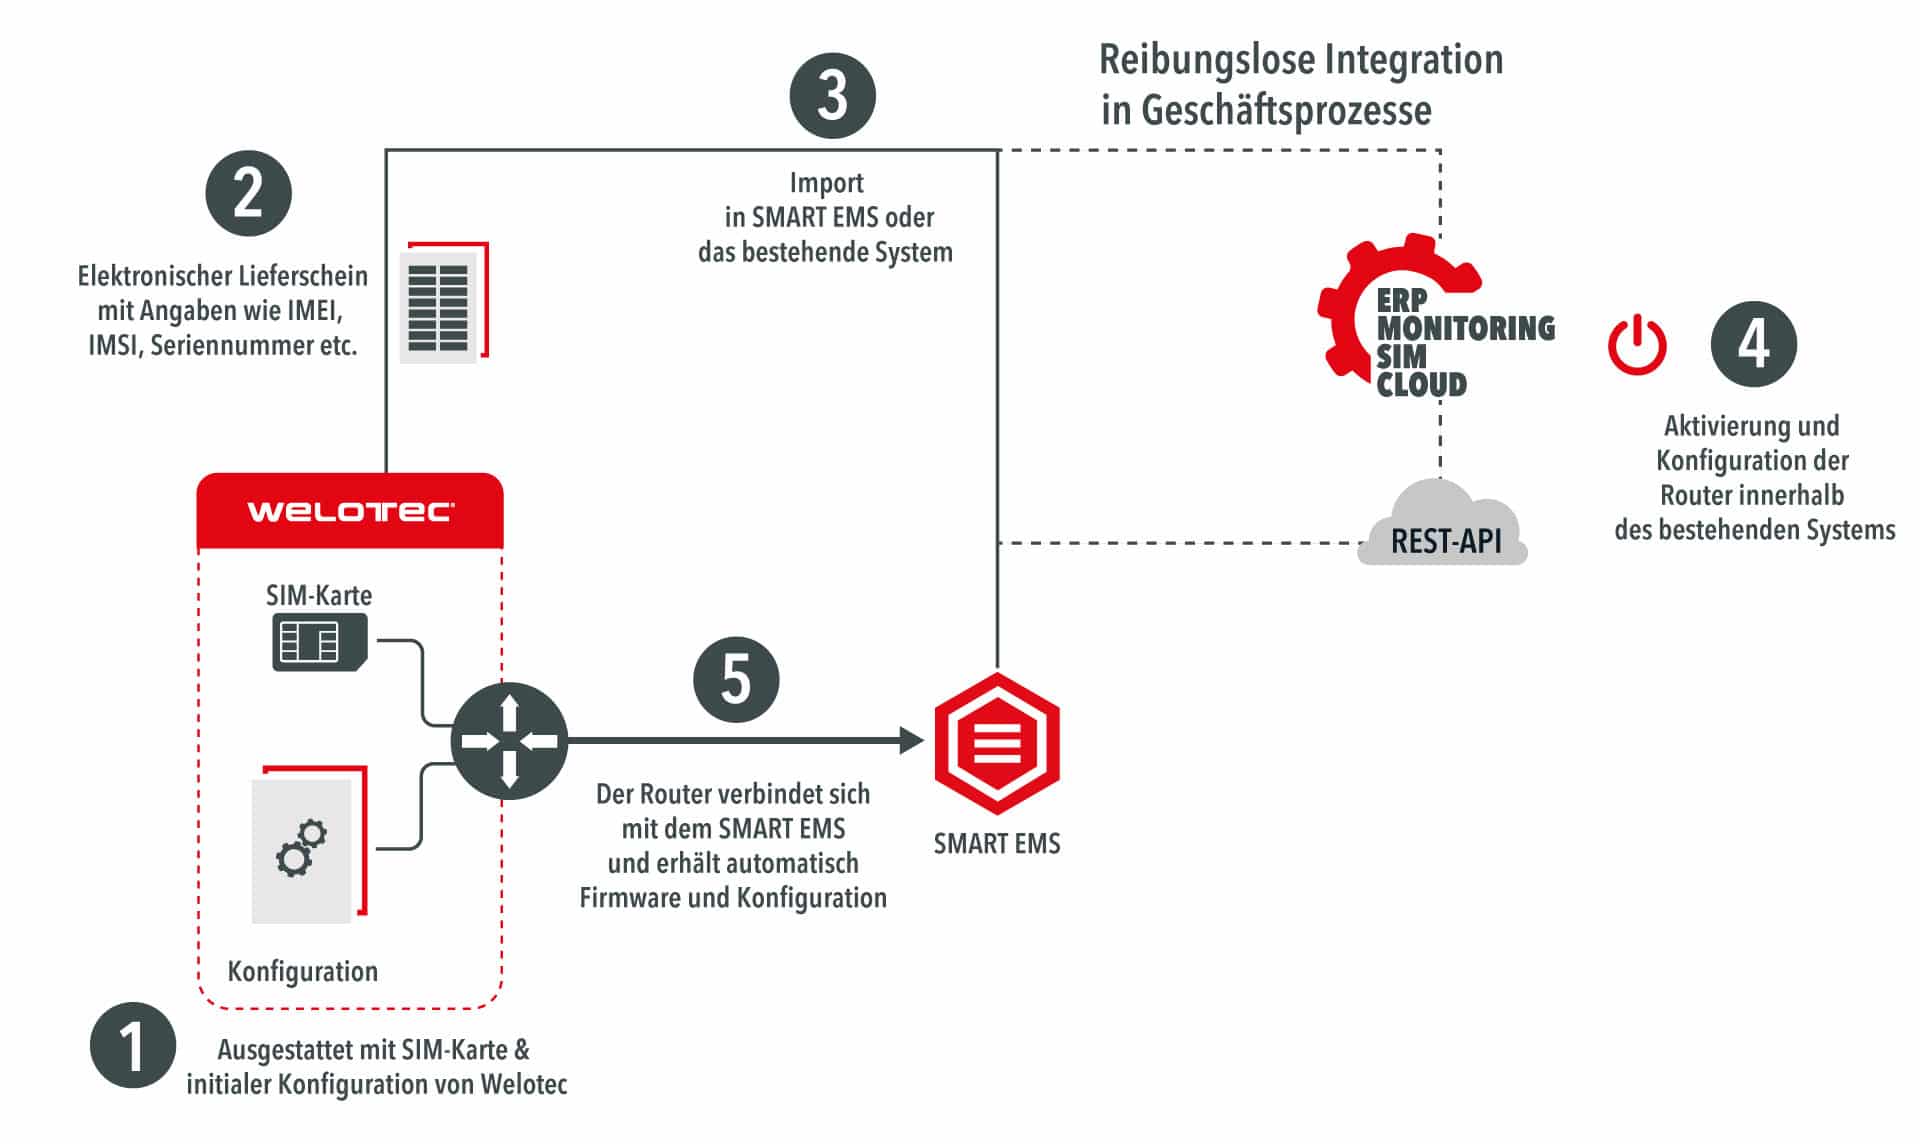 Zero-Touch-Provisioning: Rollout von Welotec TK800 and TK500 4G LTE Routern